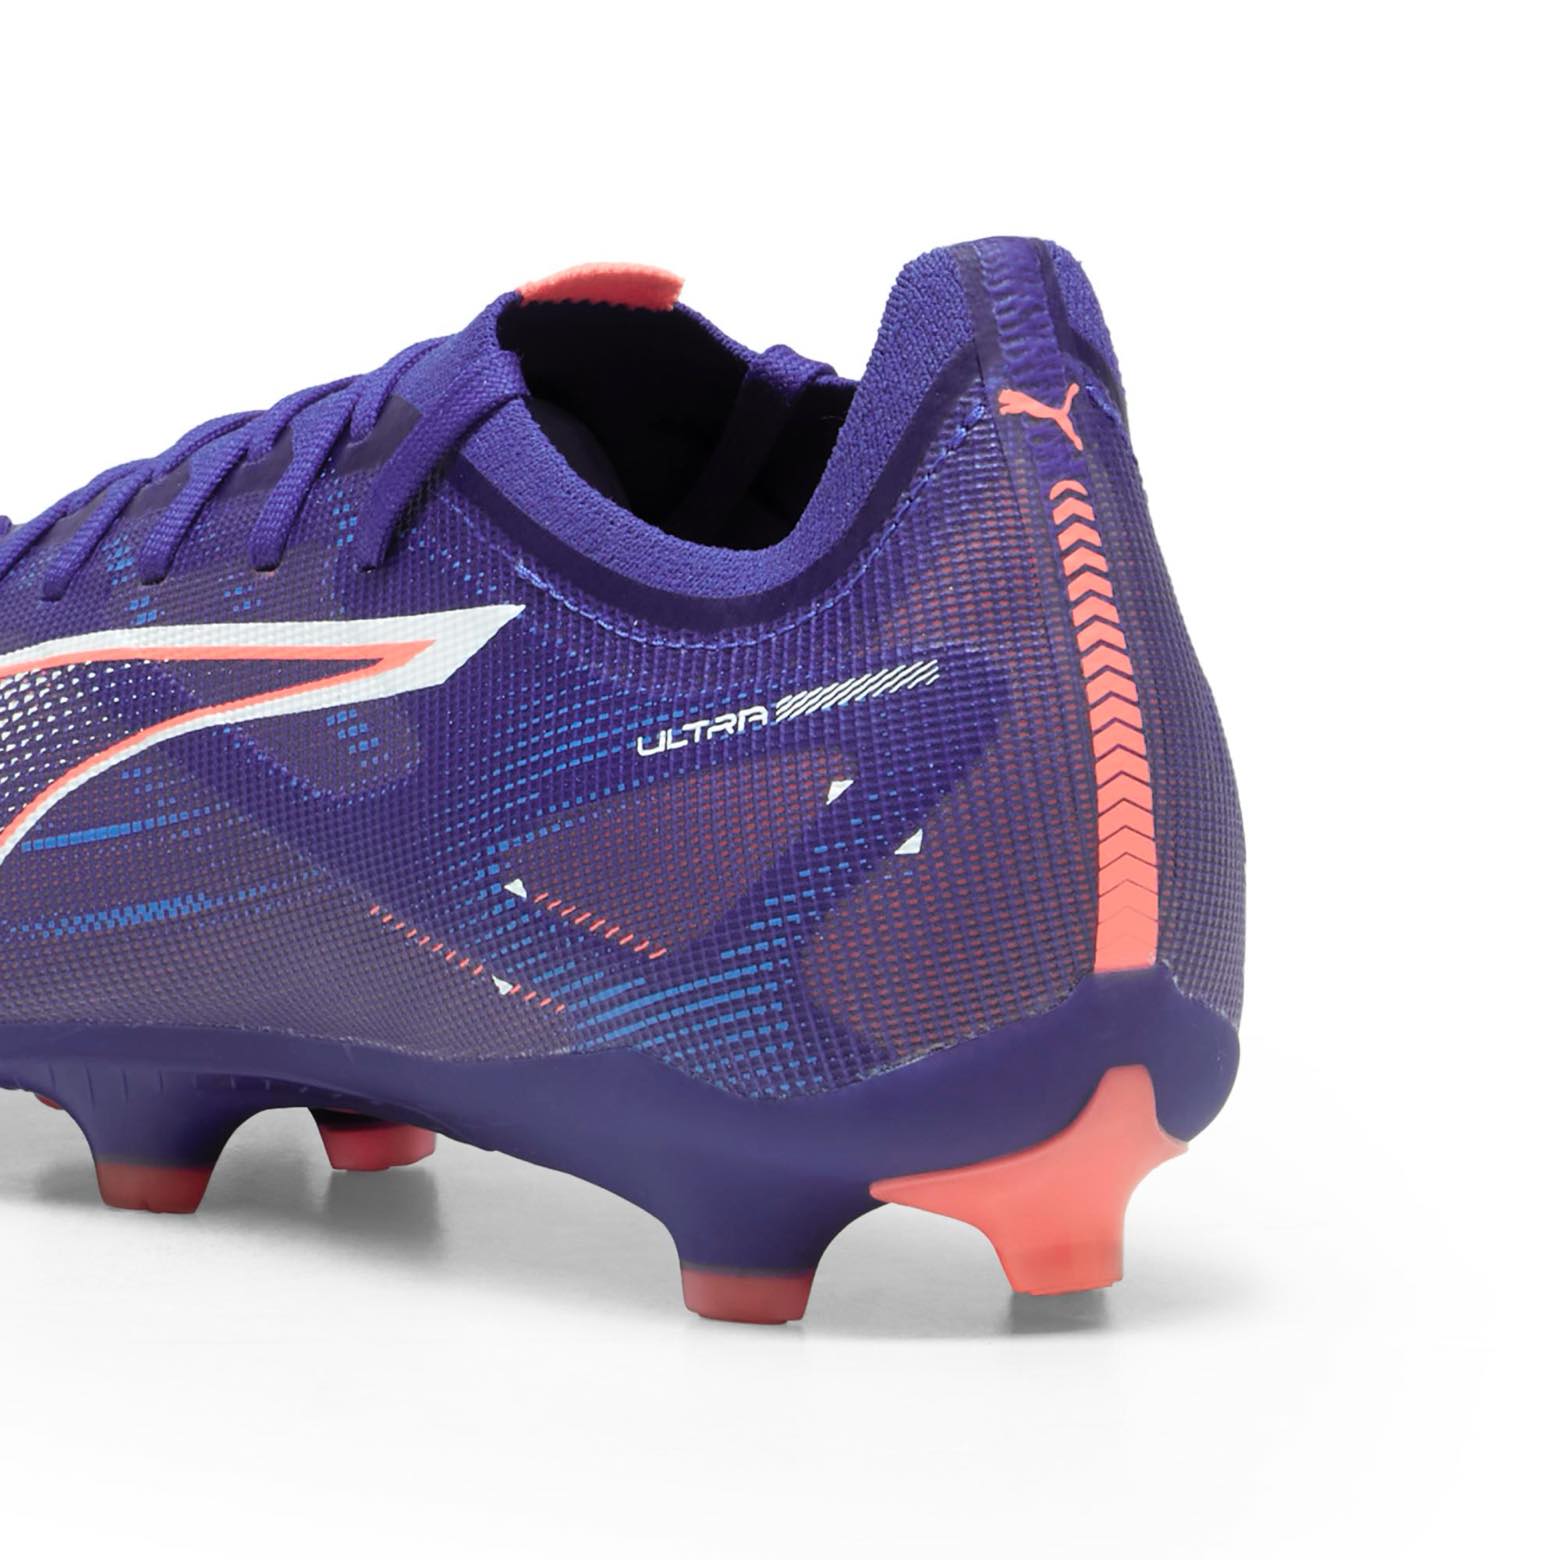 PUMA ULTRA 5 Match FG/AG Soccer Cleats on firm ground and artificial grass